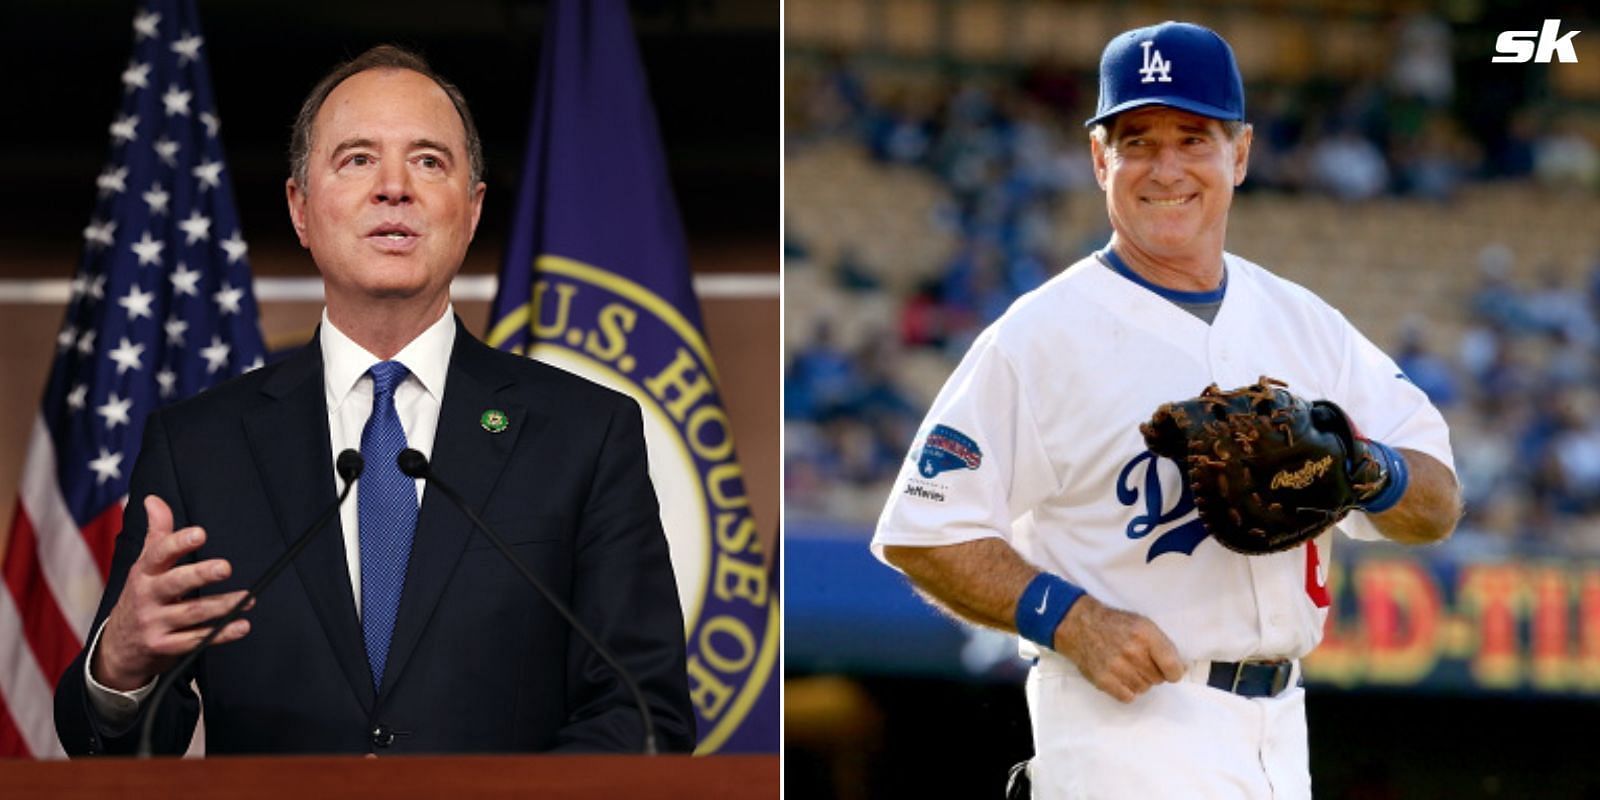 The road to a California Senate seat seems increasingly difficult for former pitcher Steve Garvey